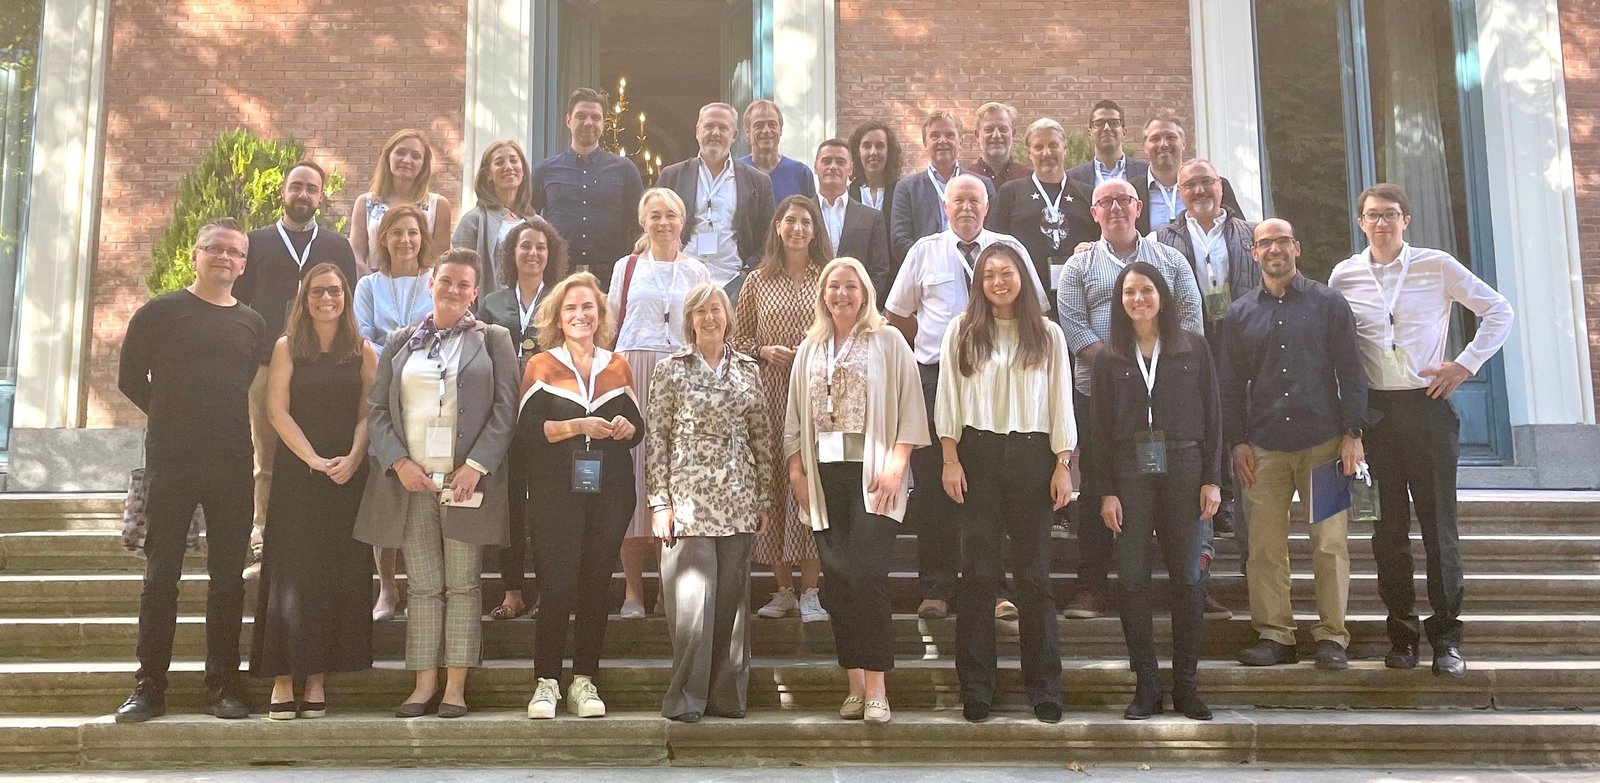 The European CISM conference attendants stood on the steps outside the venue. The attendants include Julija Razmislavičienė who represented FoxATM at the event.